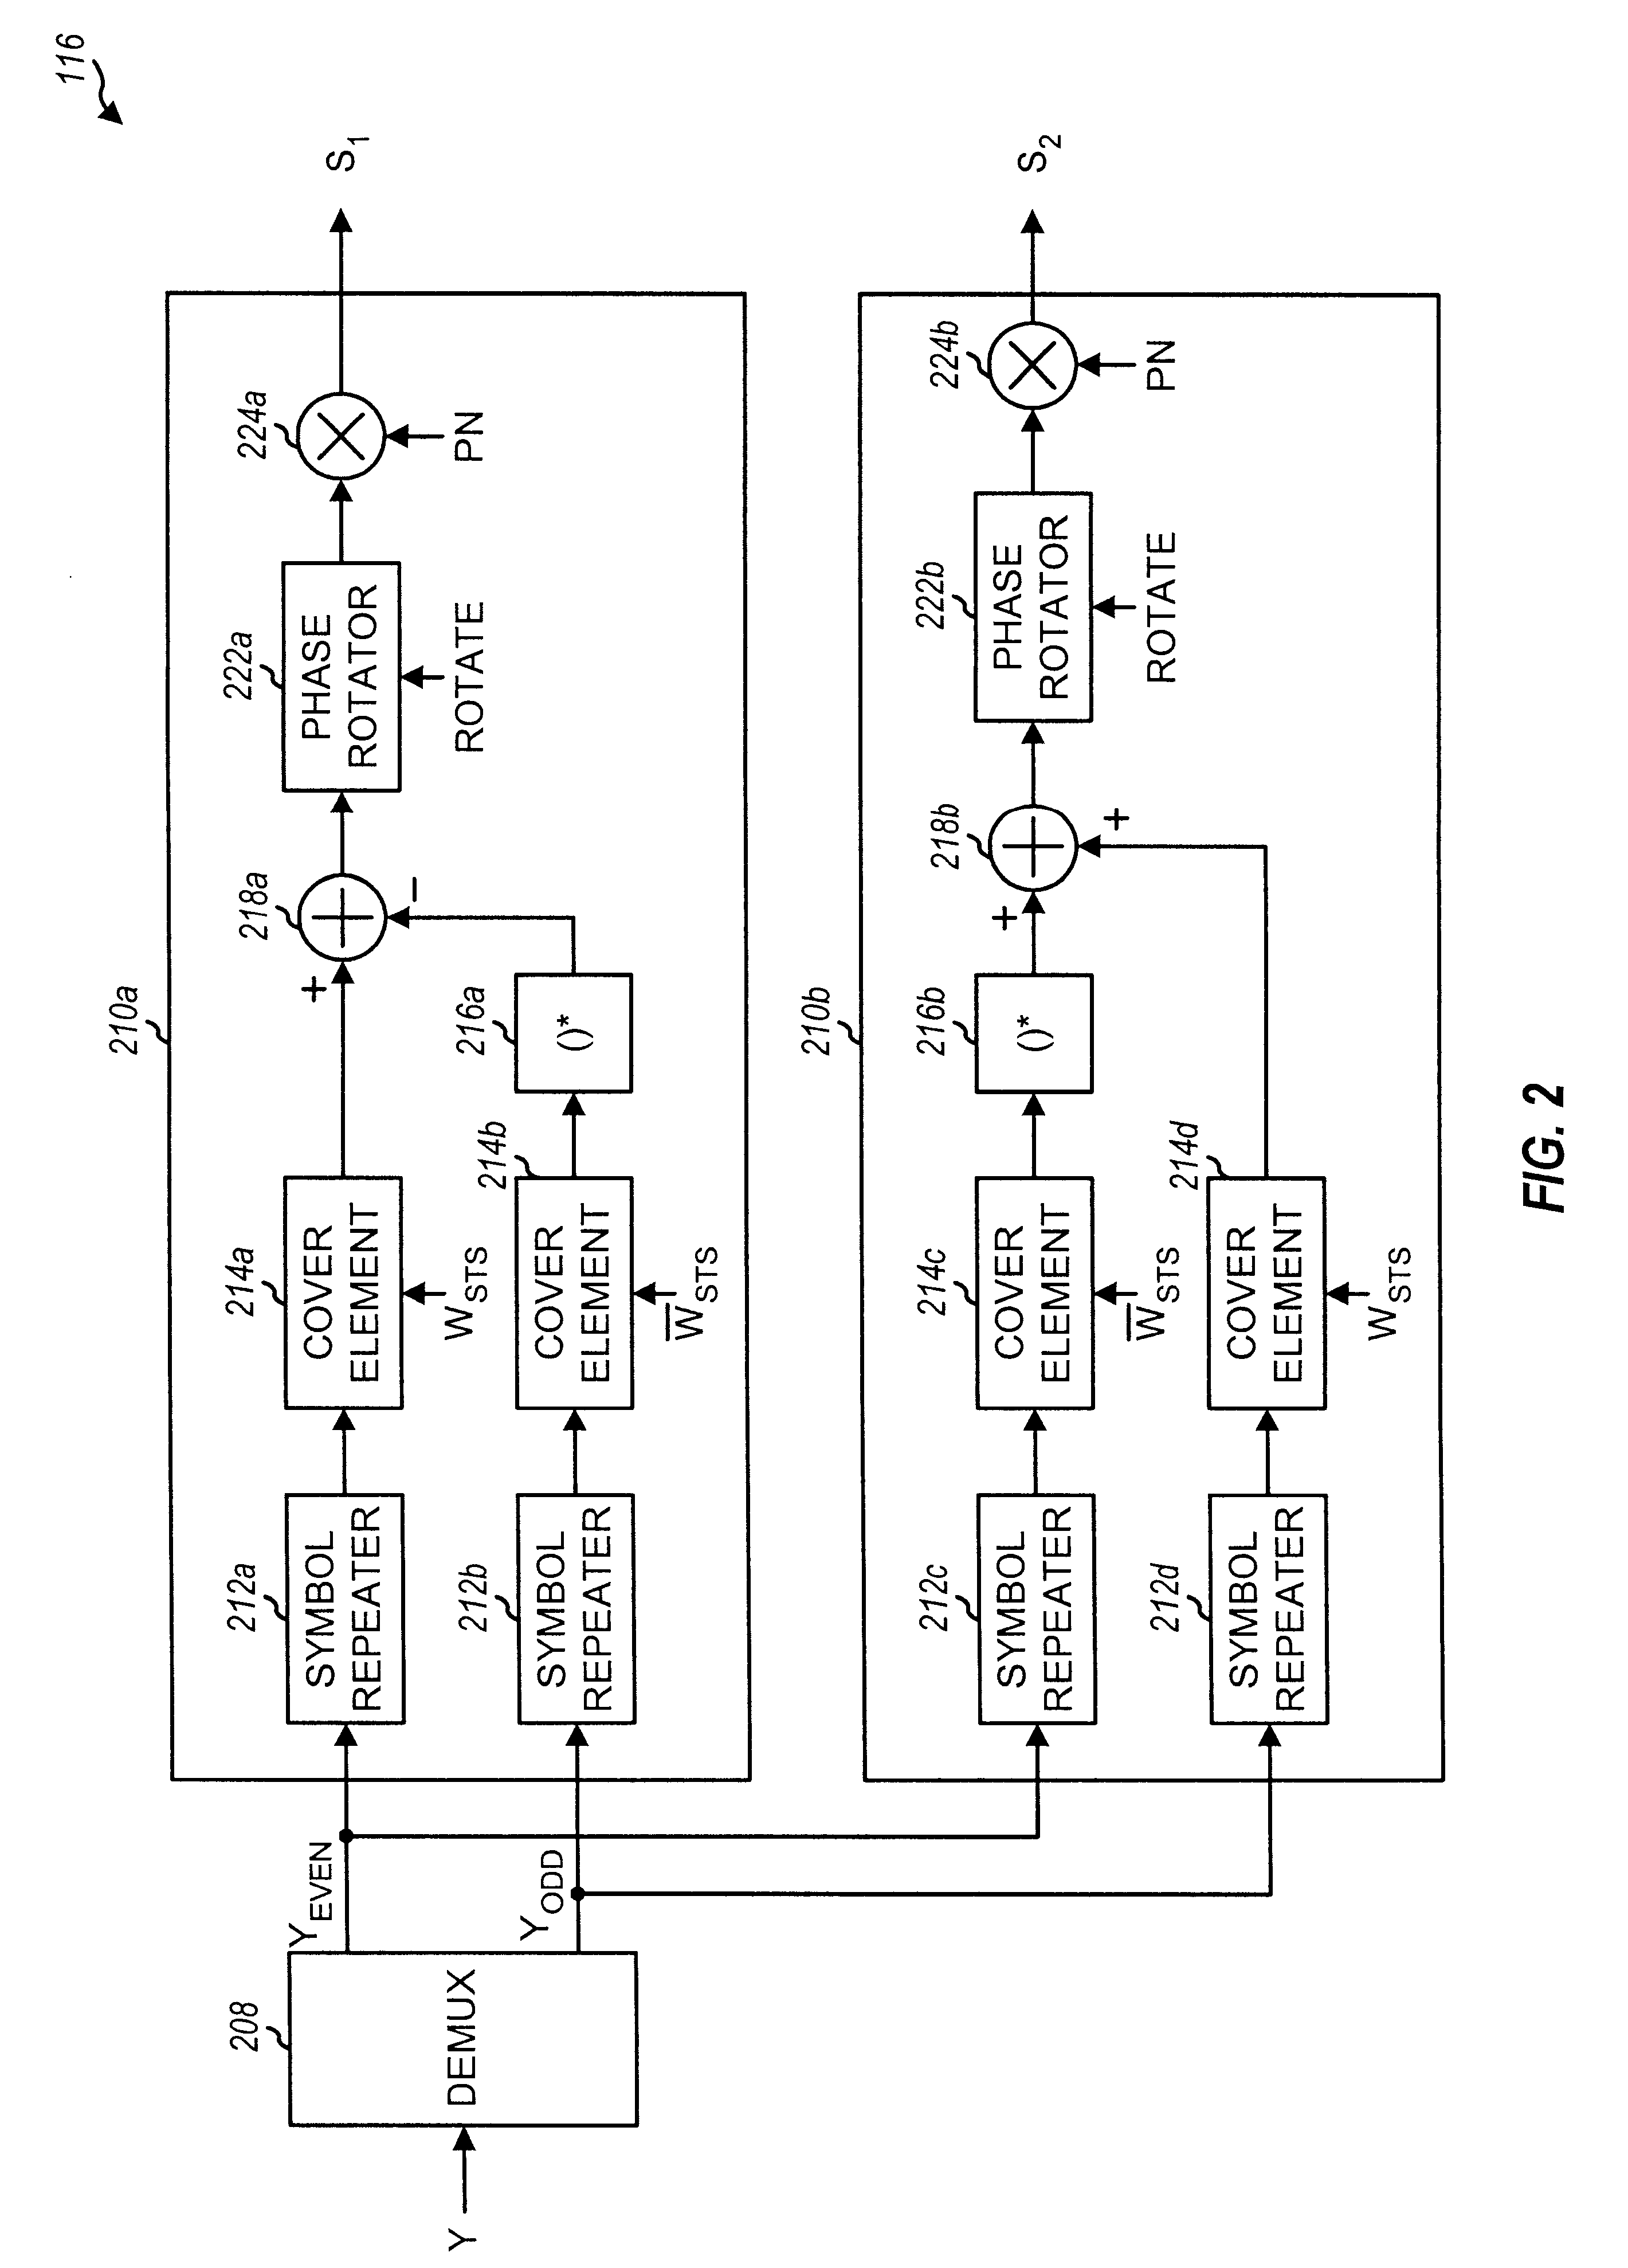 Method and apparatus for demodulating signals processed in a transmit diversity mode